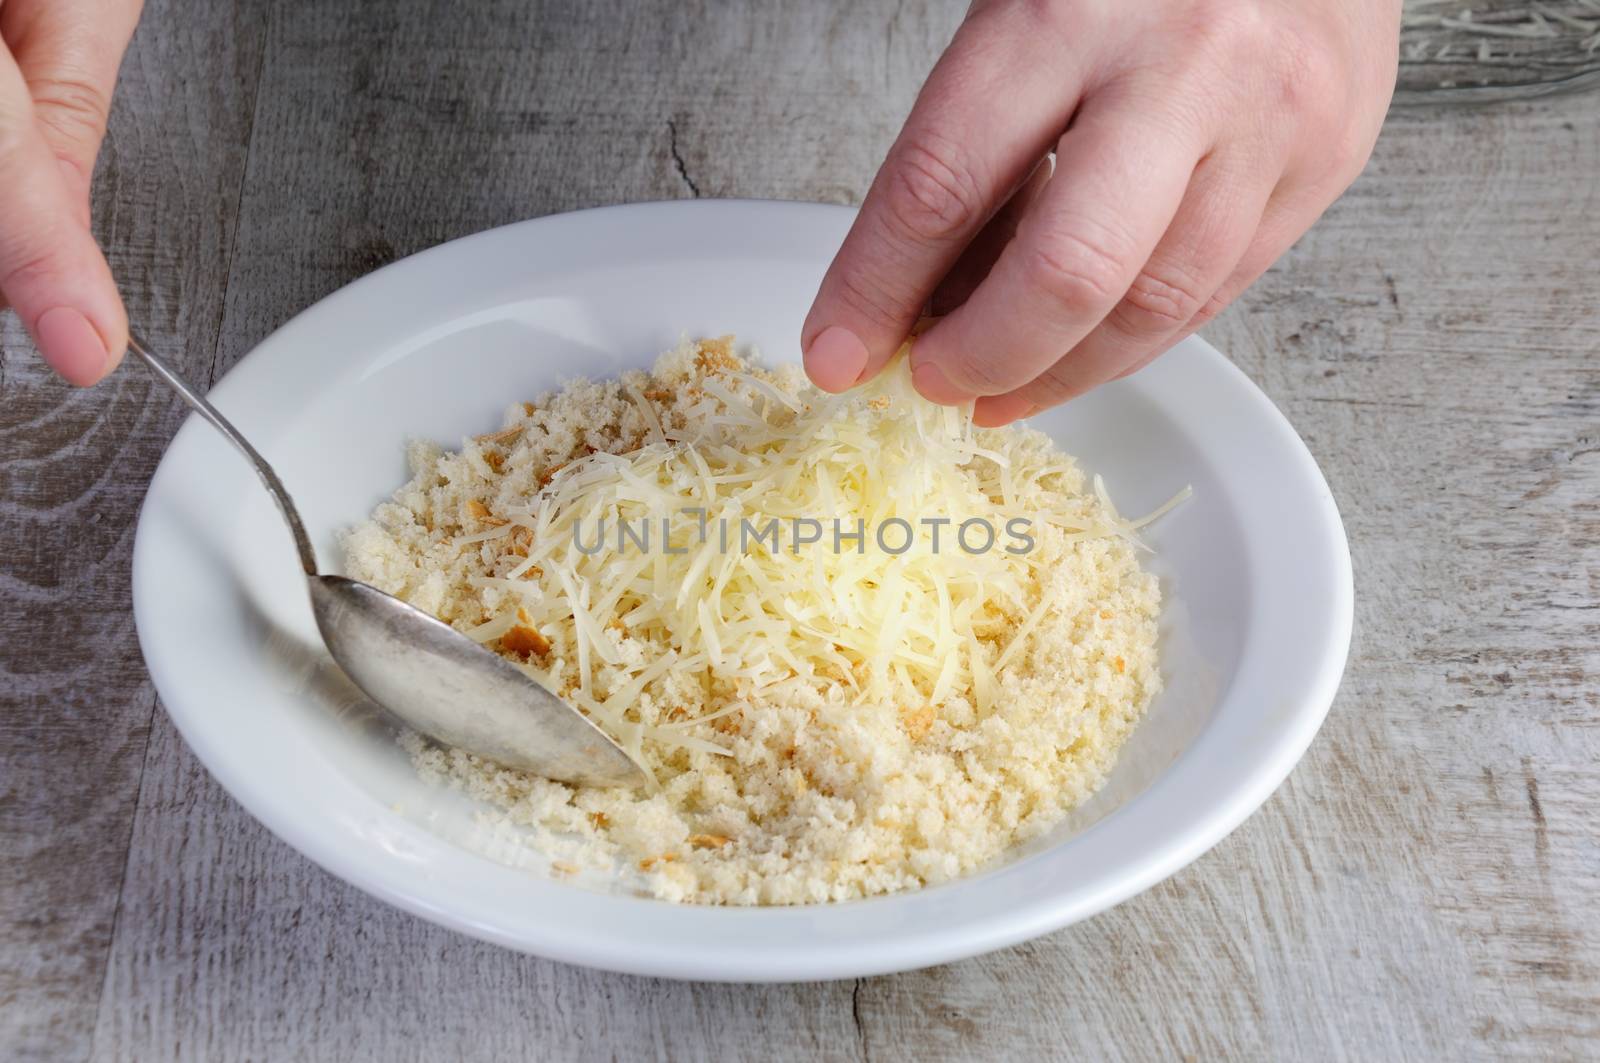   Cooking. Preparation of mixture for breading from bread crumbs and Parmesan. Step-by-step recipe. Stage preparation for cooking dishes. Series.